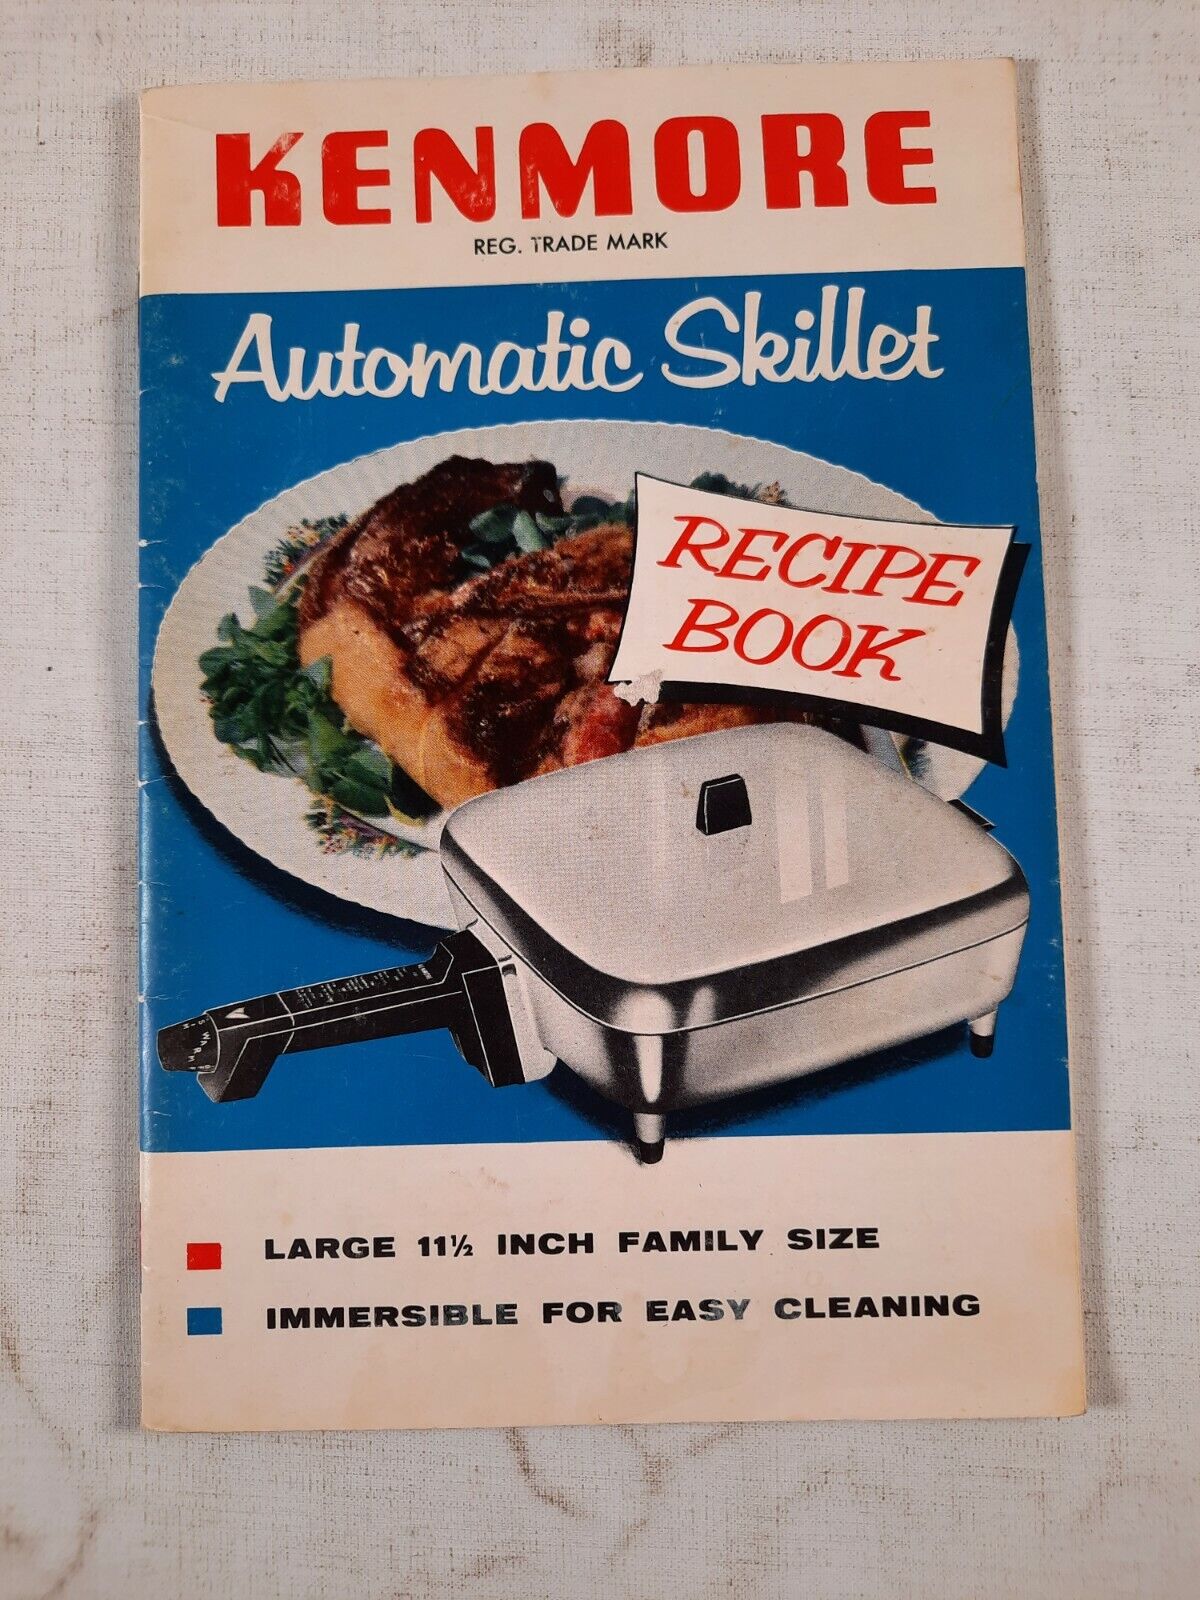 KENMORE Automatic Skillet RECIPE BOOK  Sears, Roebuck and Co. 